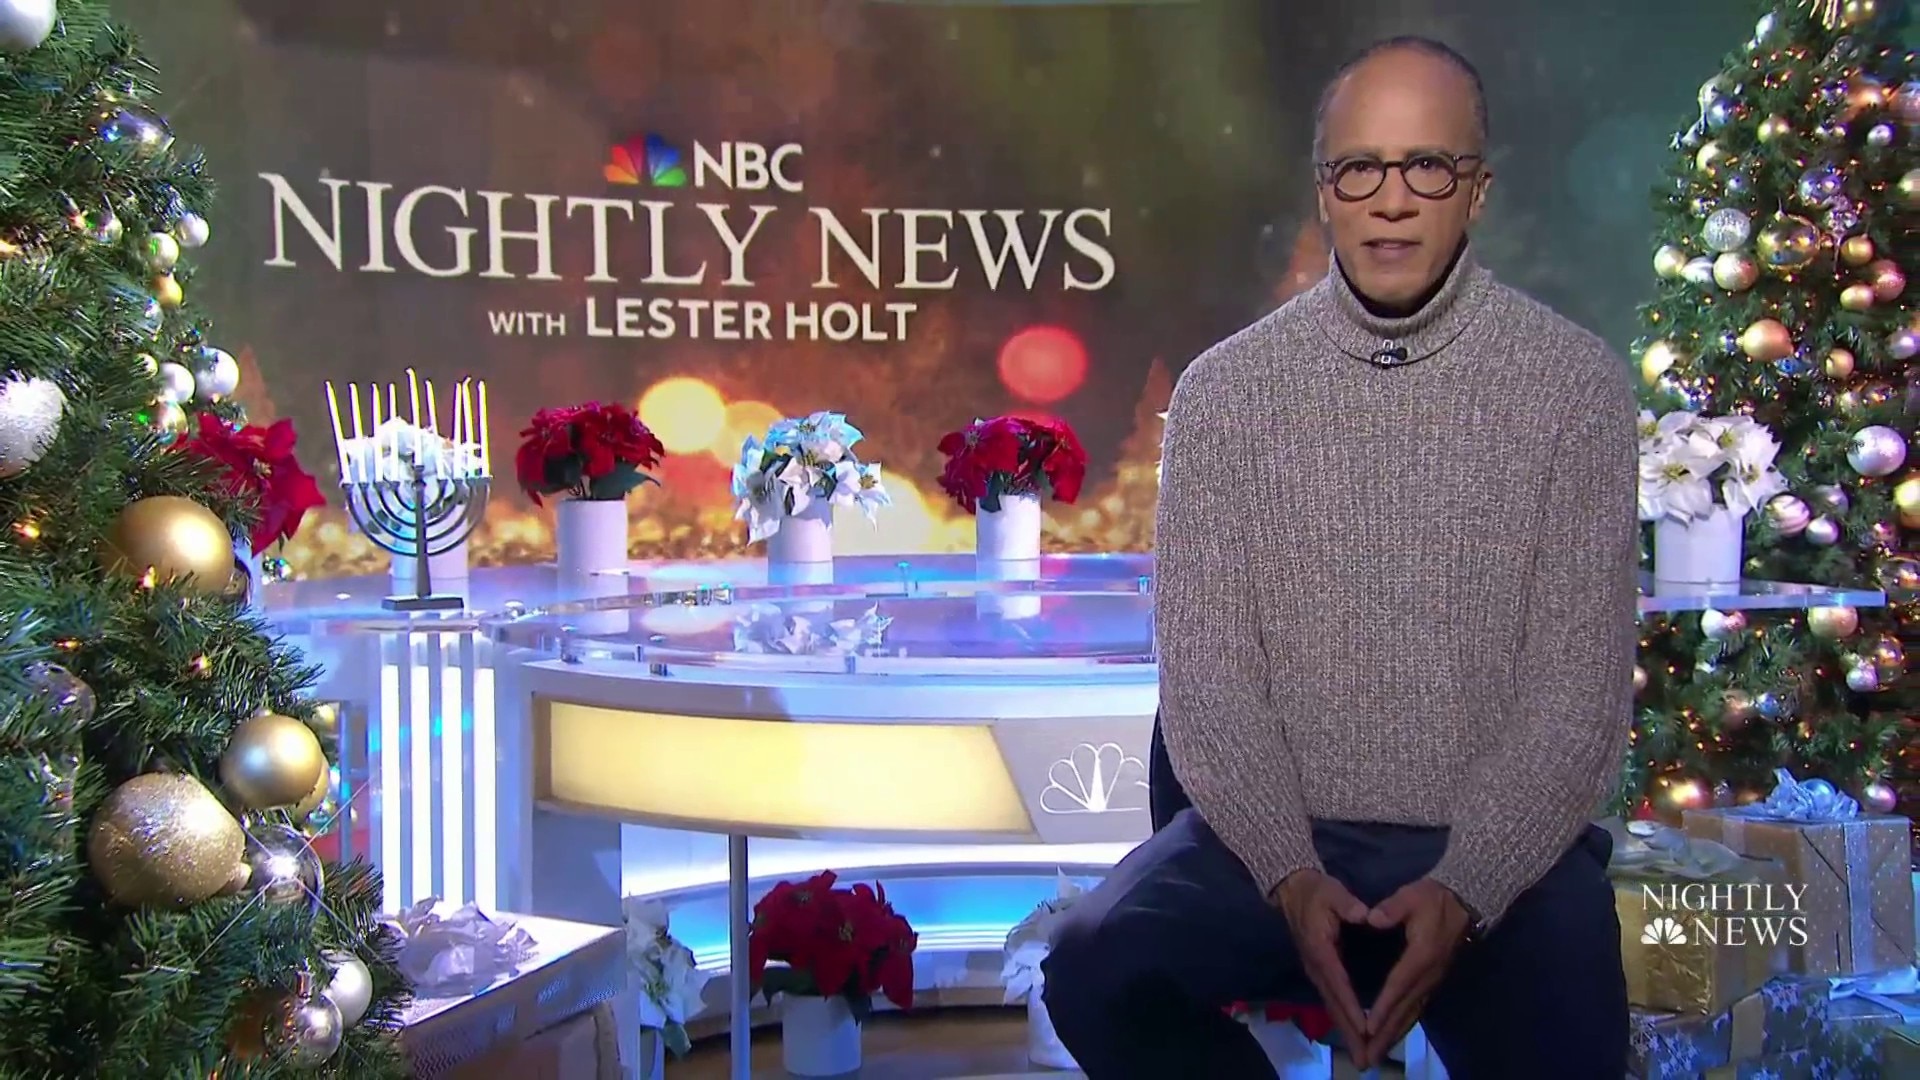 Watch Nbc Nightly News With Lester Holt Excerpt Lester Holt Spotlights The Nbc Nightly News